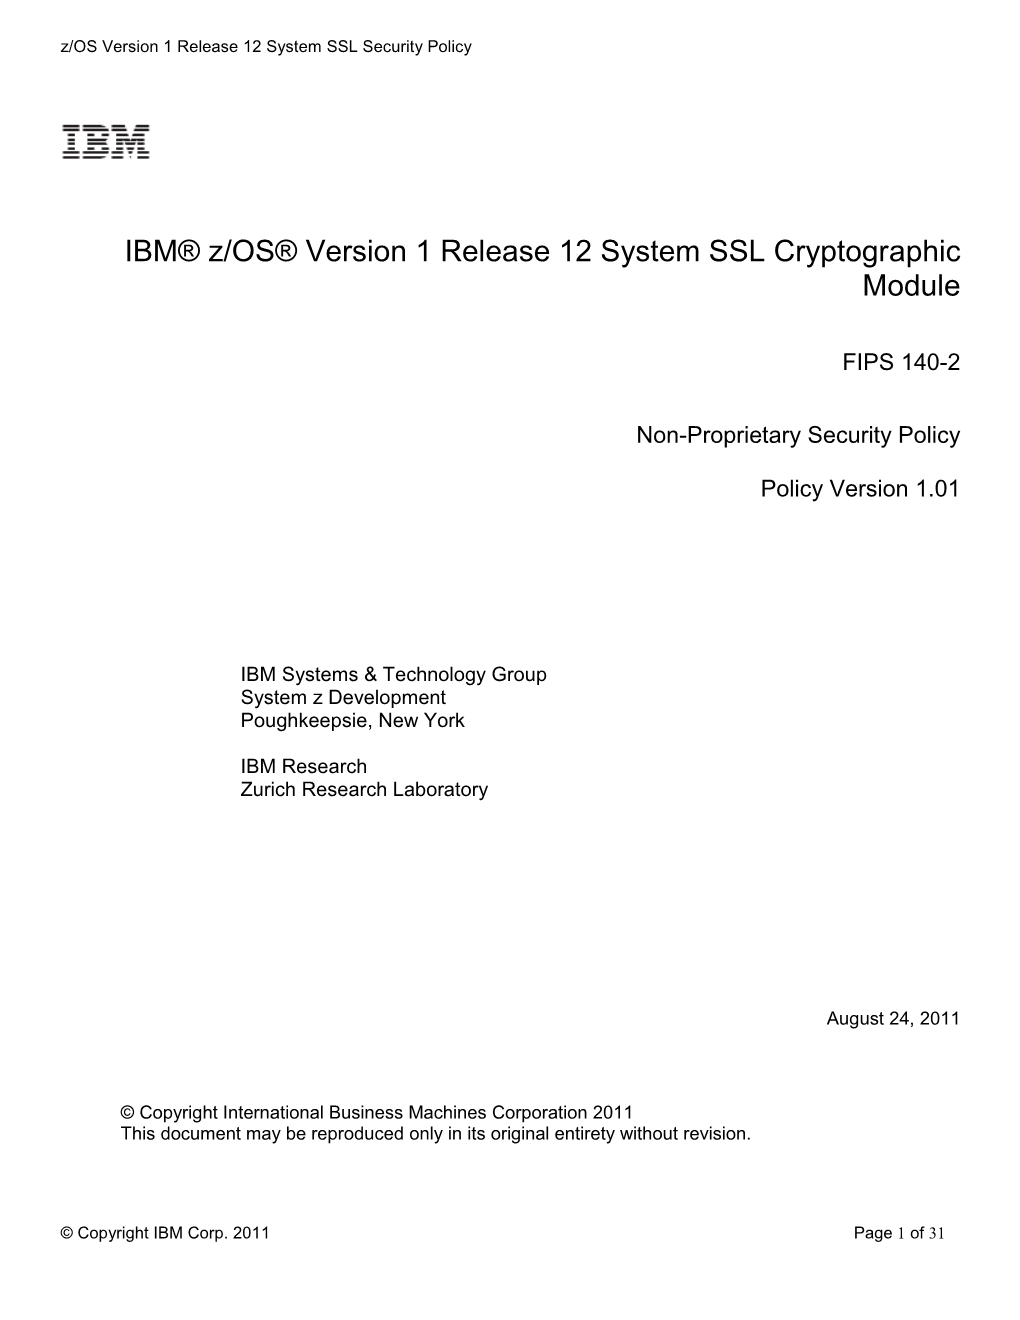 IBM® Z/OS® Version 1 Release 12 System SSL Cryptographic Module